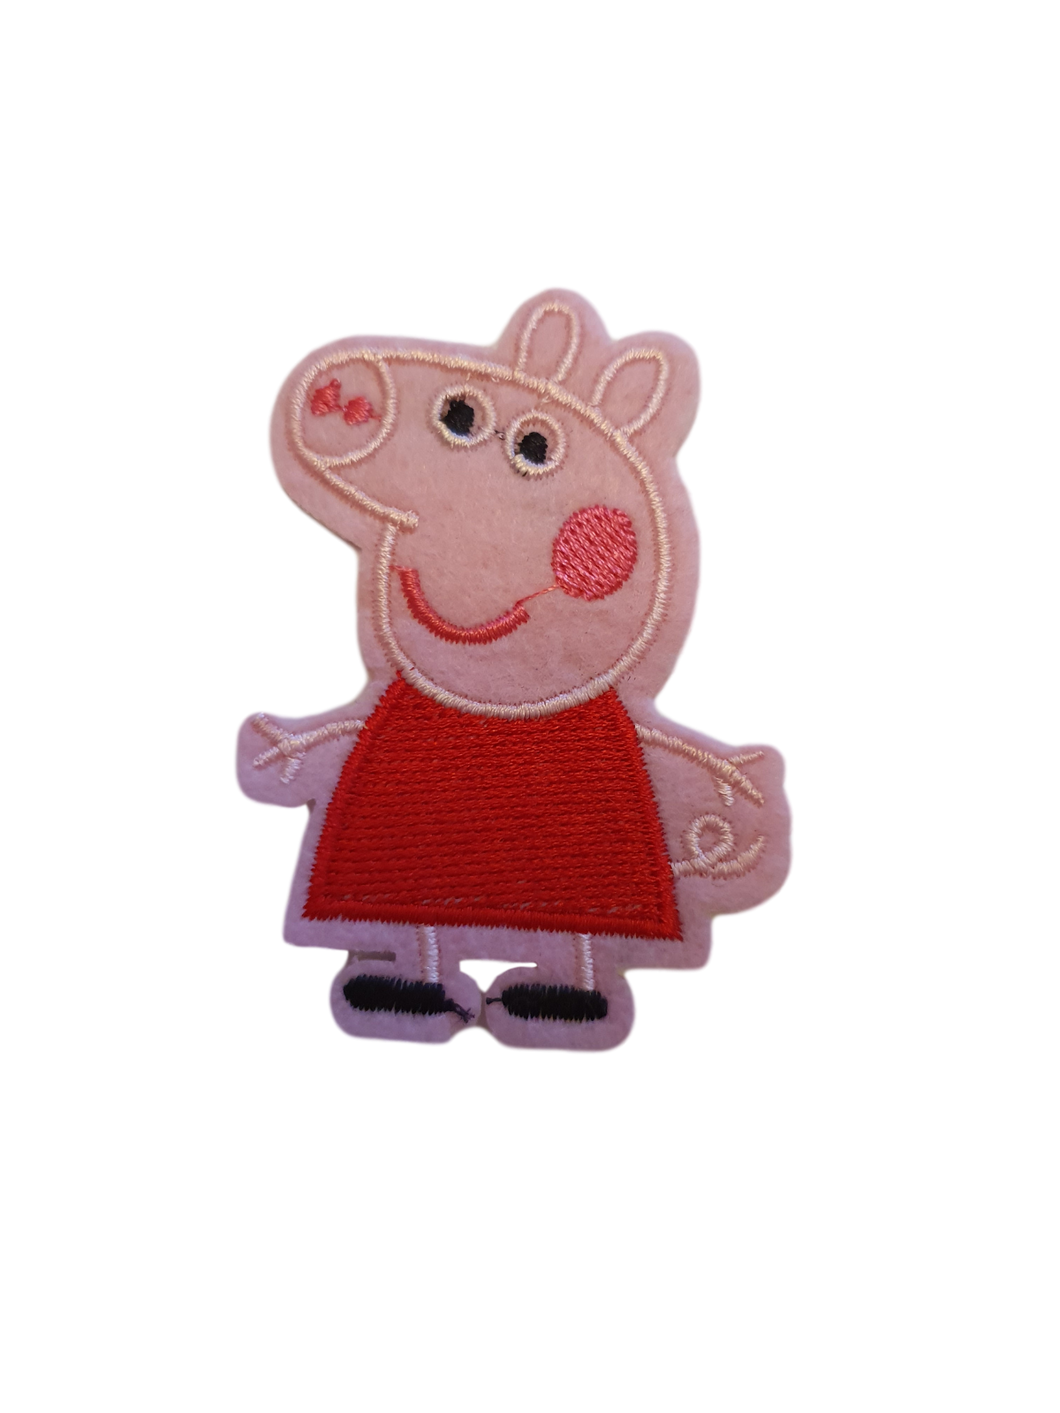 PEPPA PIG GEORGE CARTOON KIDS IRON ON CLOTH EMBROIDERY PATCH CLOTHES BAGS 7cm